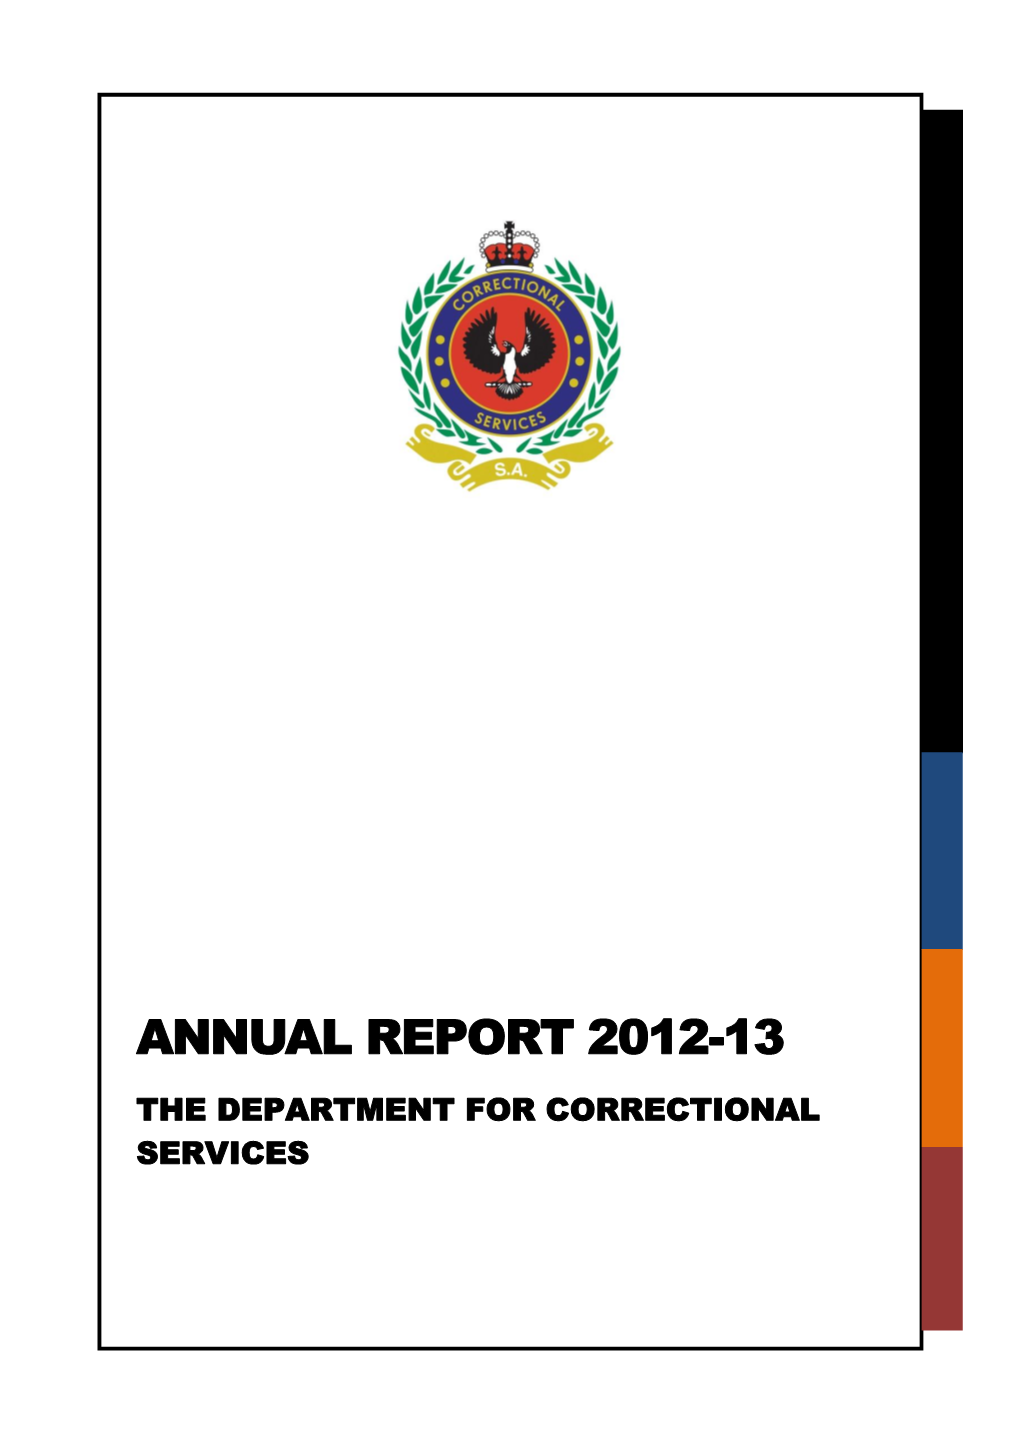 Annual Report 2012-13 the Department for Correctional Services